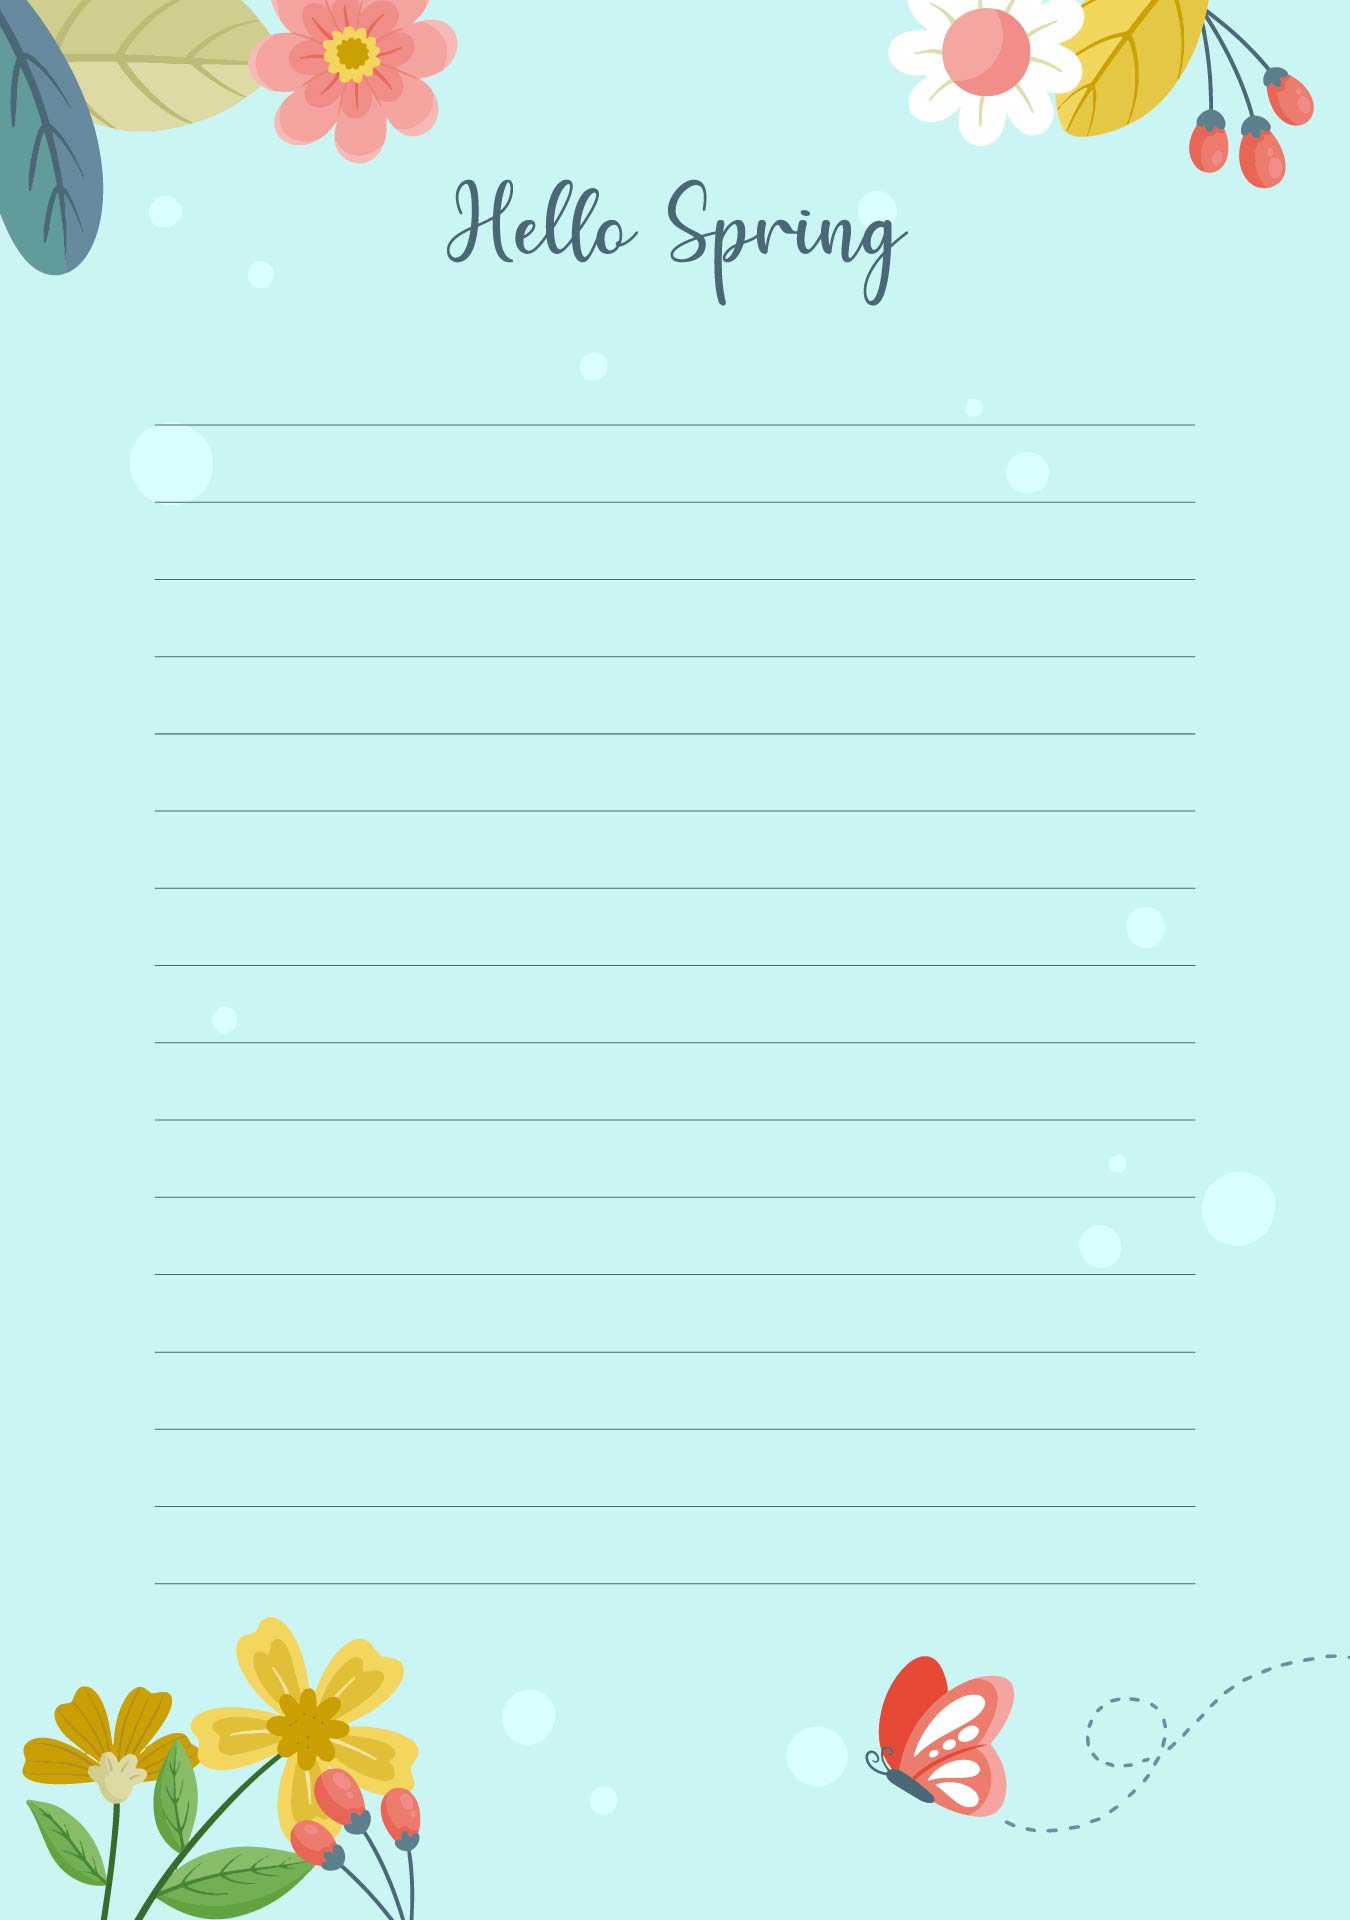 5-best-images-of-spring-writing-paper-printable-free-printable-border